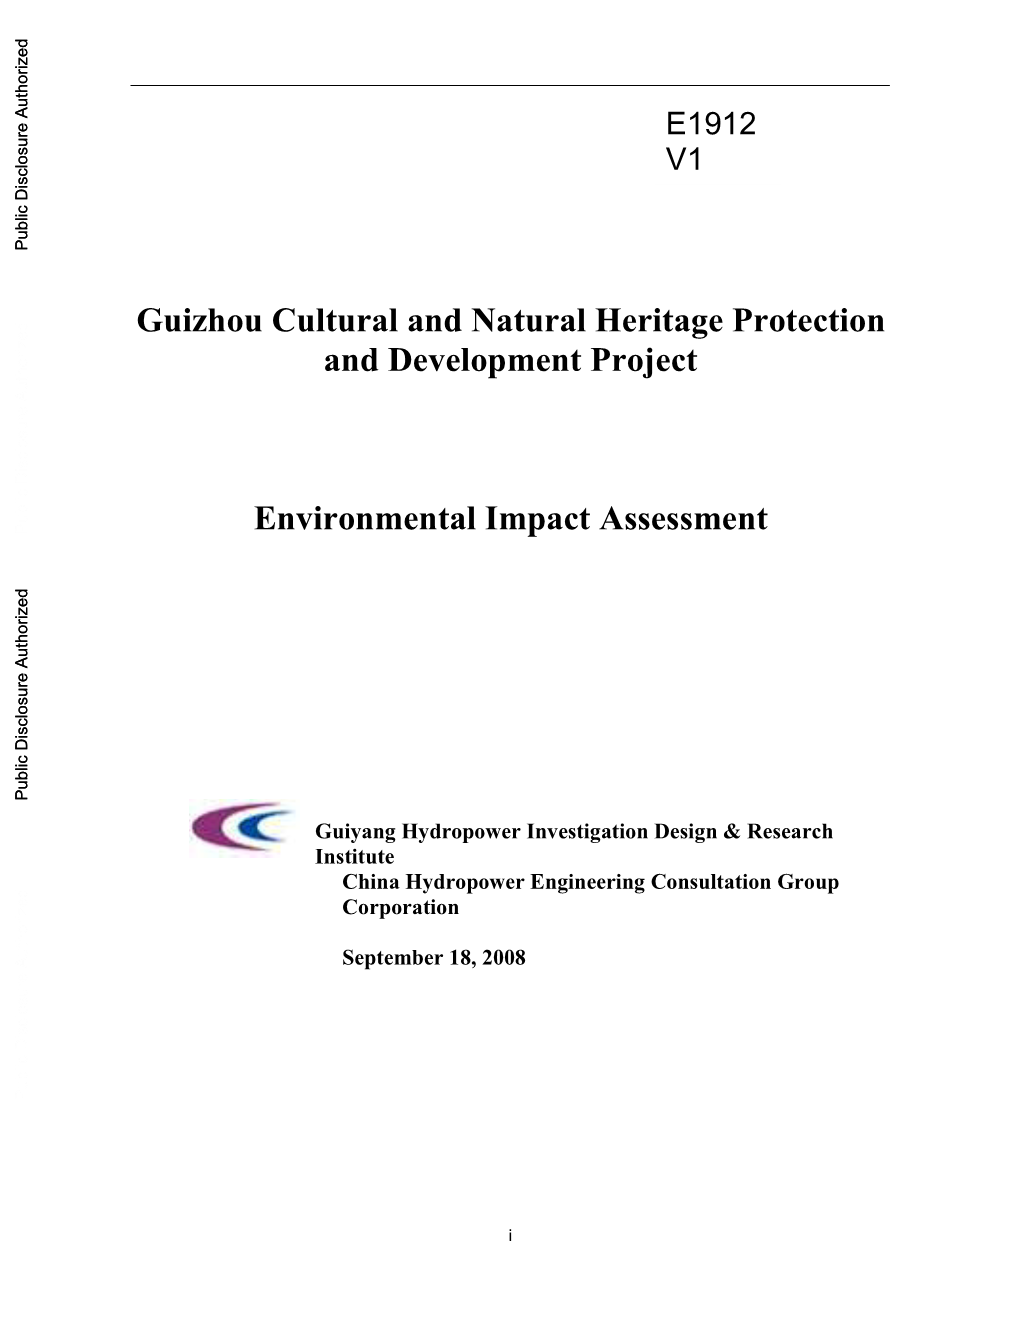 Guizhou Cultural and Natural Heritage Protection and Development Project